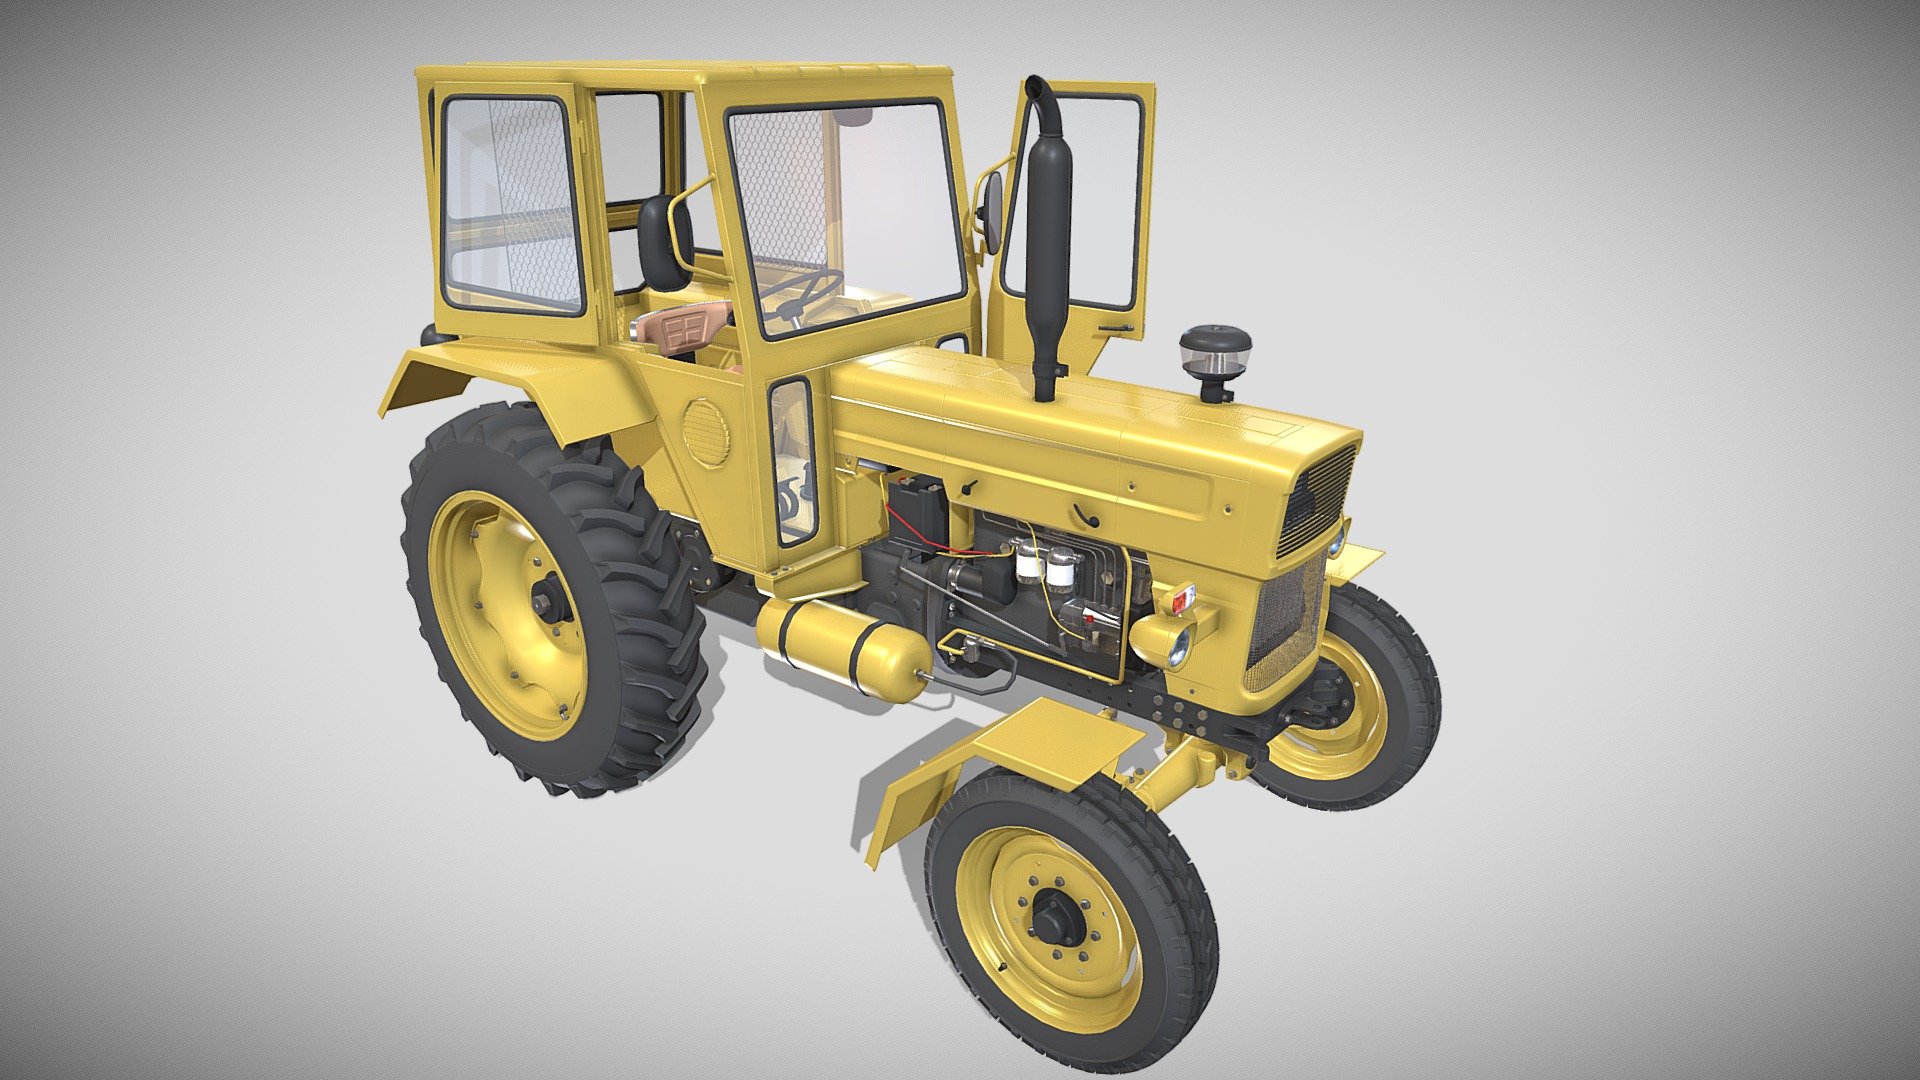 Highly detailed Tractor 3d model rendered with Cycles in Blender, as per seen on attached images.

The model is very intricately built, it has the transmission and engine, with cooling for oil and water, injection pump, fuel lines, compressed air circuit, electric circuit modeled. Some of these elements cannot be seen on the main renders, so I have also rendered the chassis in order to showcase them.

The 3d model is scaled to original size in Blender.
File formats:

-.blend, rendered with cycles, as seen in the images;
-.blend, rendered with cycles, as seen in the images, with doors open;
-.obj, with materials applied;
-.obj, with materials applied, with doors open;
-.dae, with materials applied;
-.dae, with materials applied, with doors open; 
-.fbx, with materials applied;
-.fbx, with materials applied, with doors open;
-.stl;
-.stl, with doors open;

Files come named appropriately and split by file format.

3D Software:

The 3D model was originally created in Blender 2.8 and rendered with Cycles 3d model